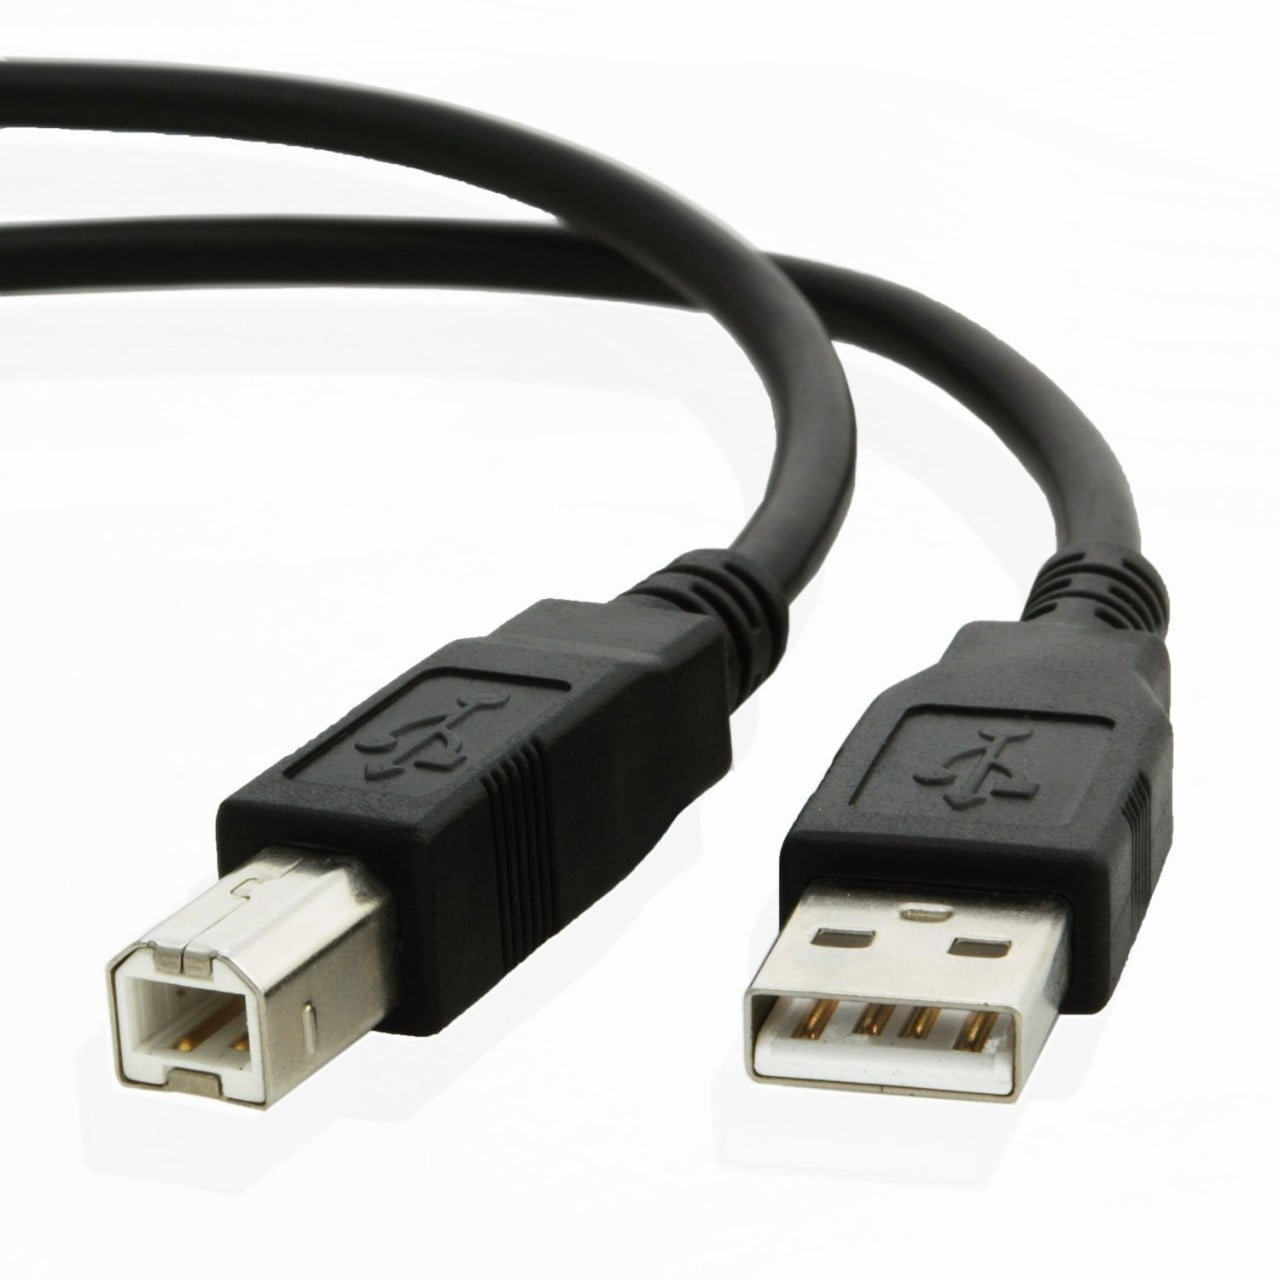 OMNIHIL 30 Feet Long High Speed USB 2.0 Cable Compatible with EPSON Workforce WF-2760 